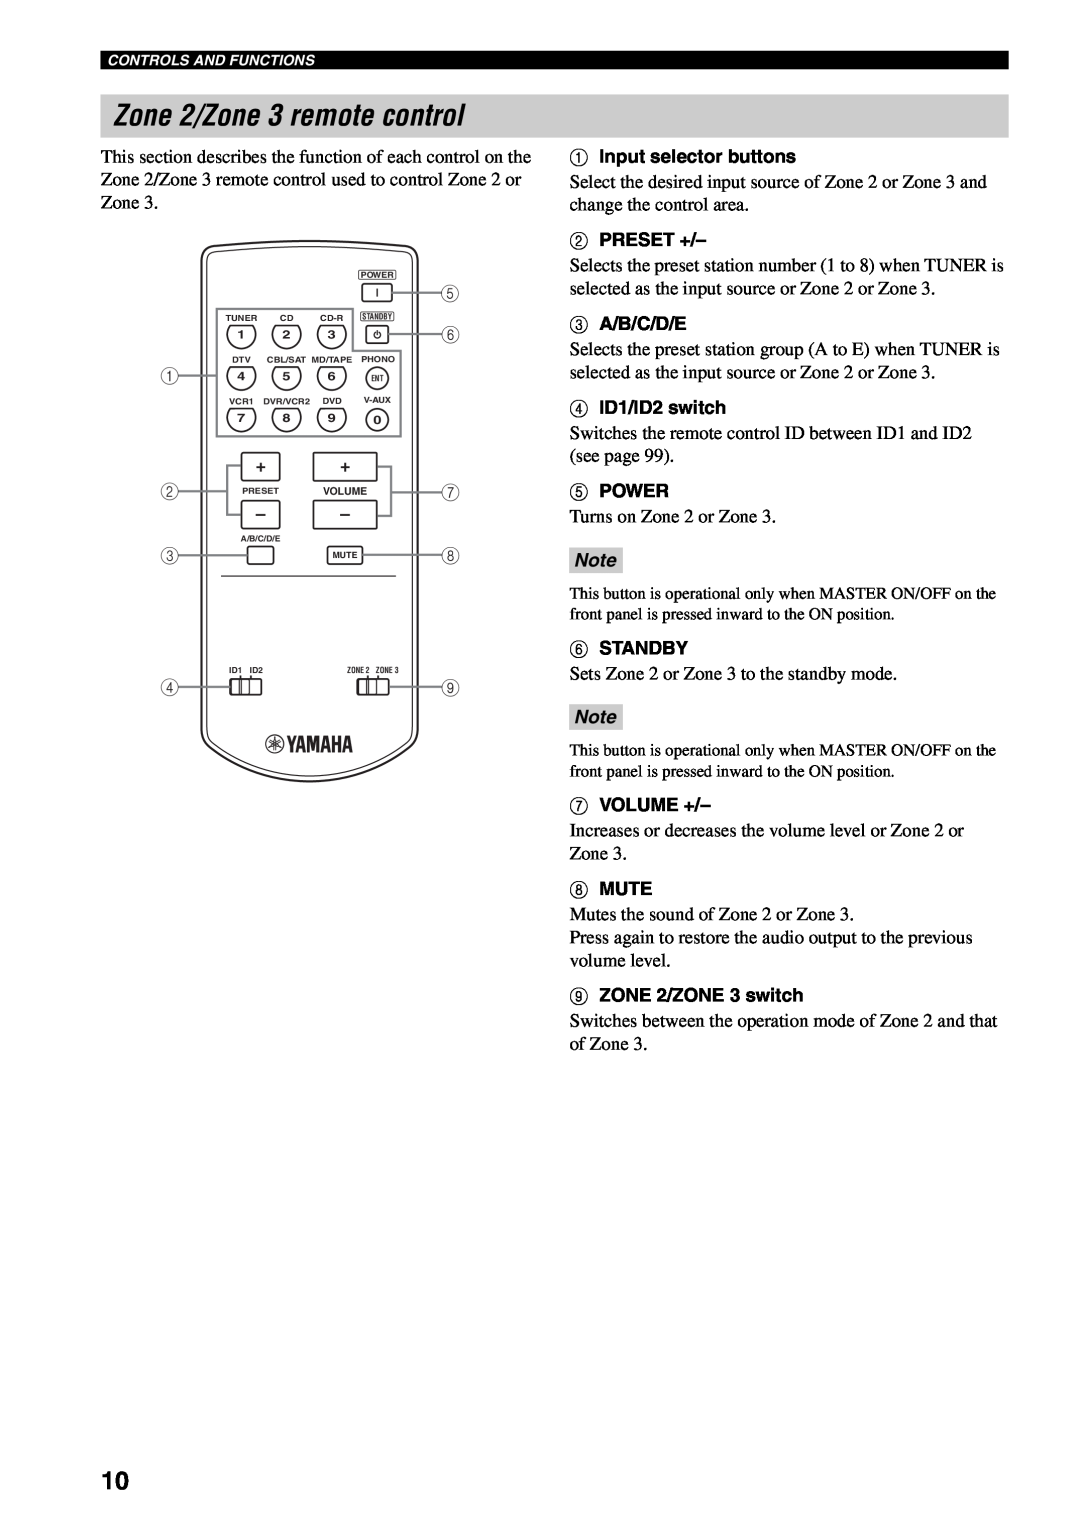 Yamaha RX-V2600 Zone 2/Zone 3 remote control, Input selector buttons, Preset +, 3 A/B/C/D/E, 4 ID1/ID2 switch, Power, Mute 